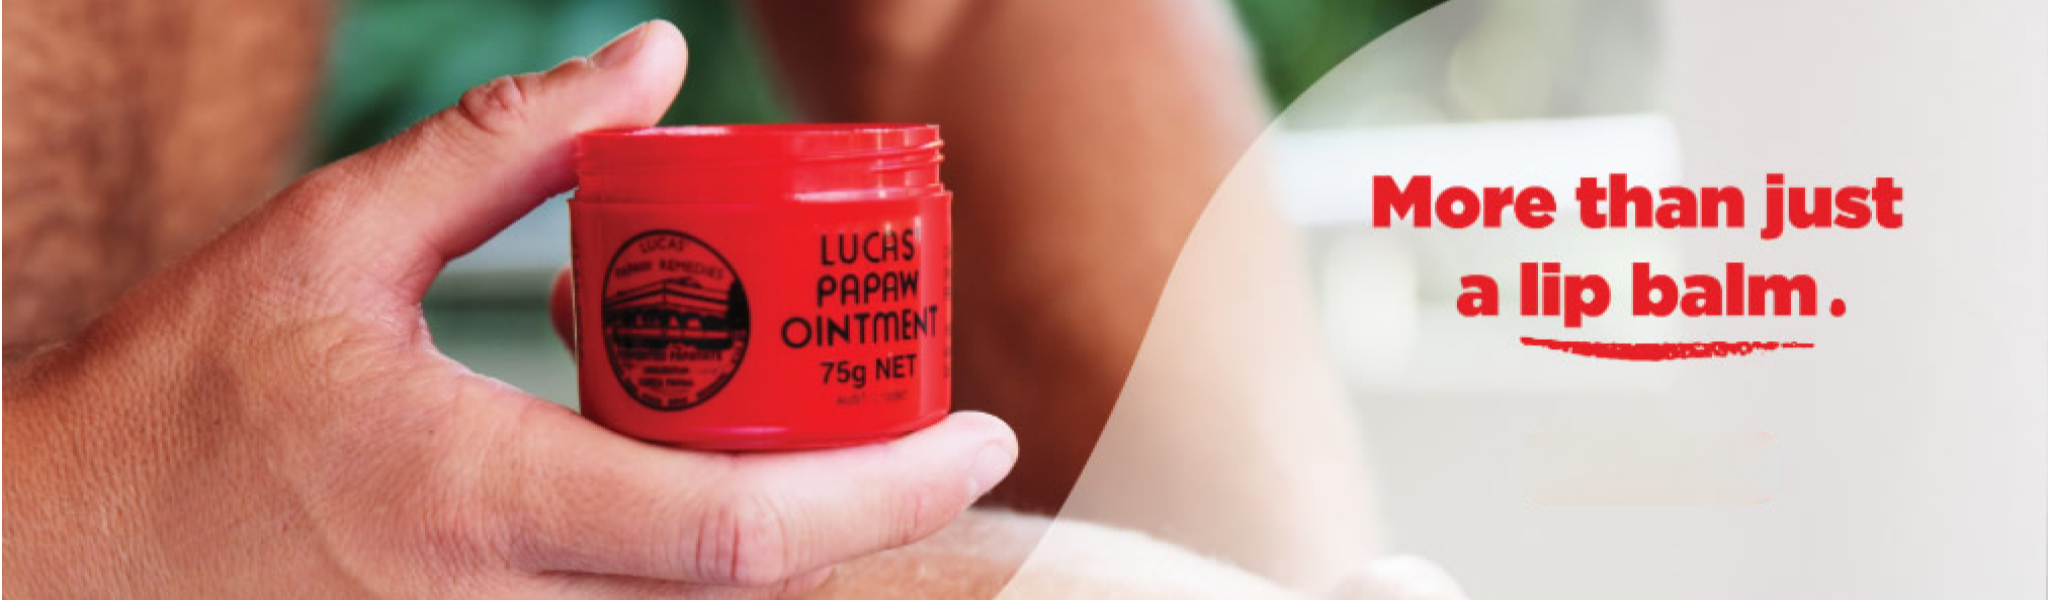 Lucas' Papaw Ointment 25g (SET OF TWO) (*** Price is FOR TWO***)